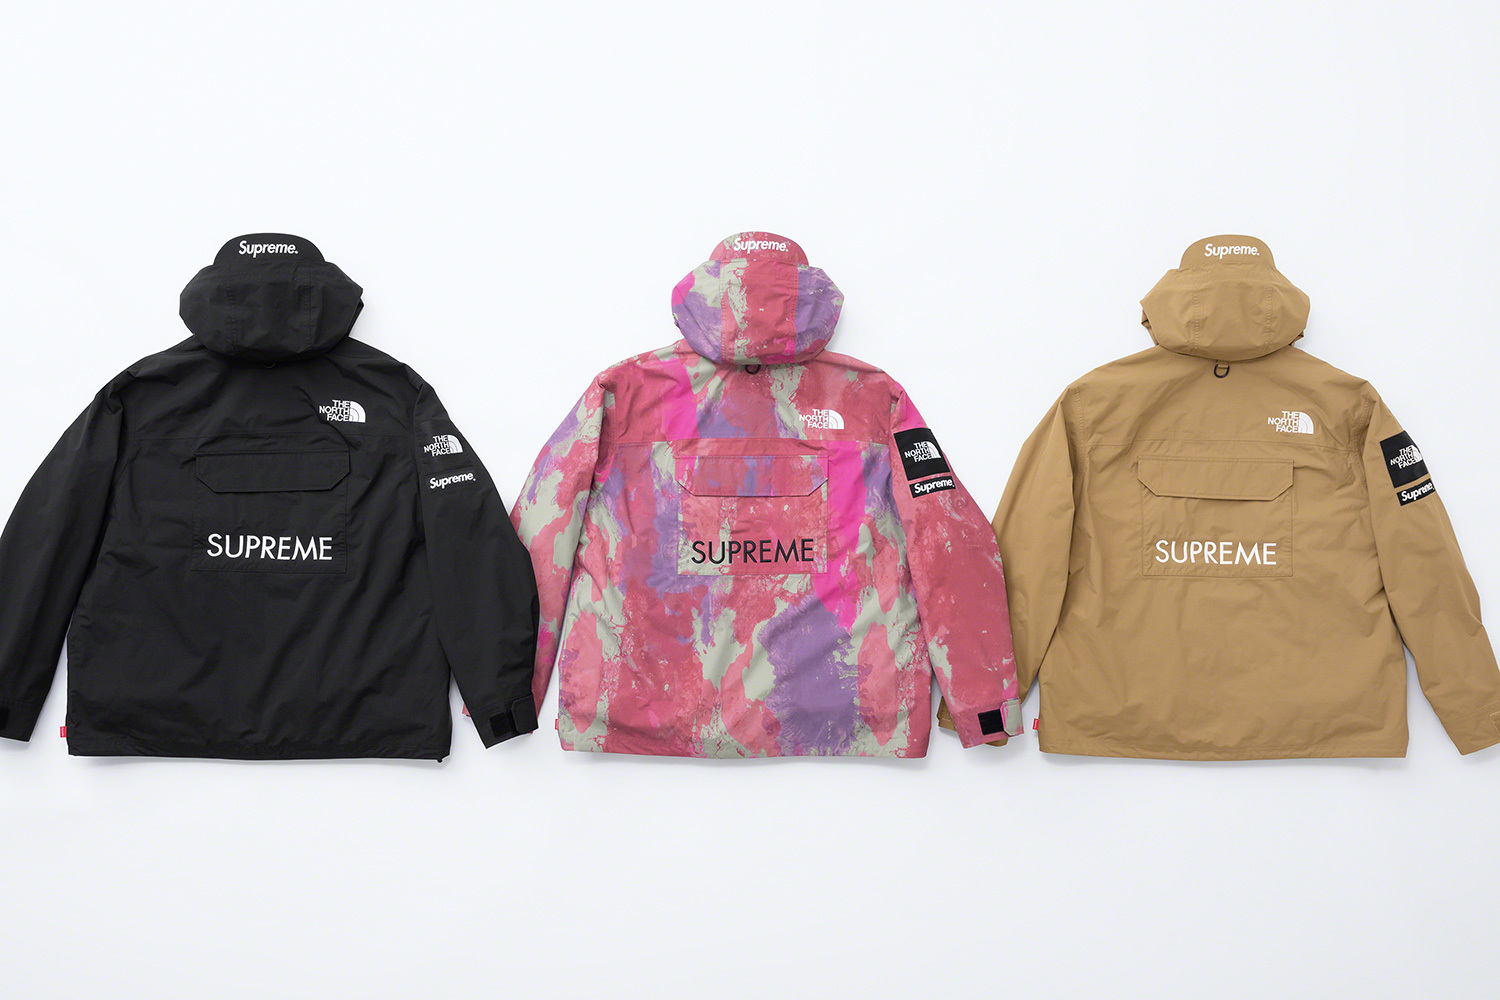 Supreme x The North Face Spring 2020 Collection